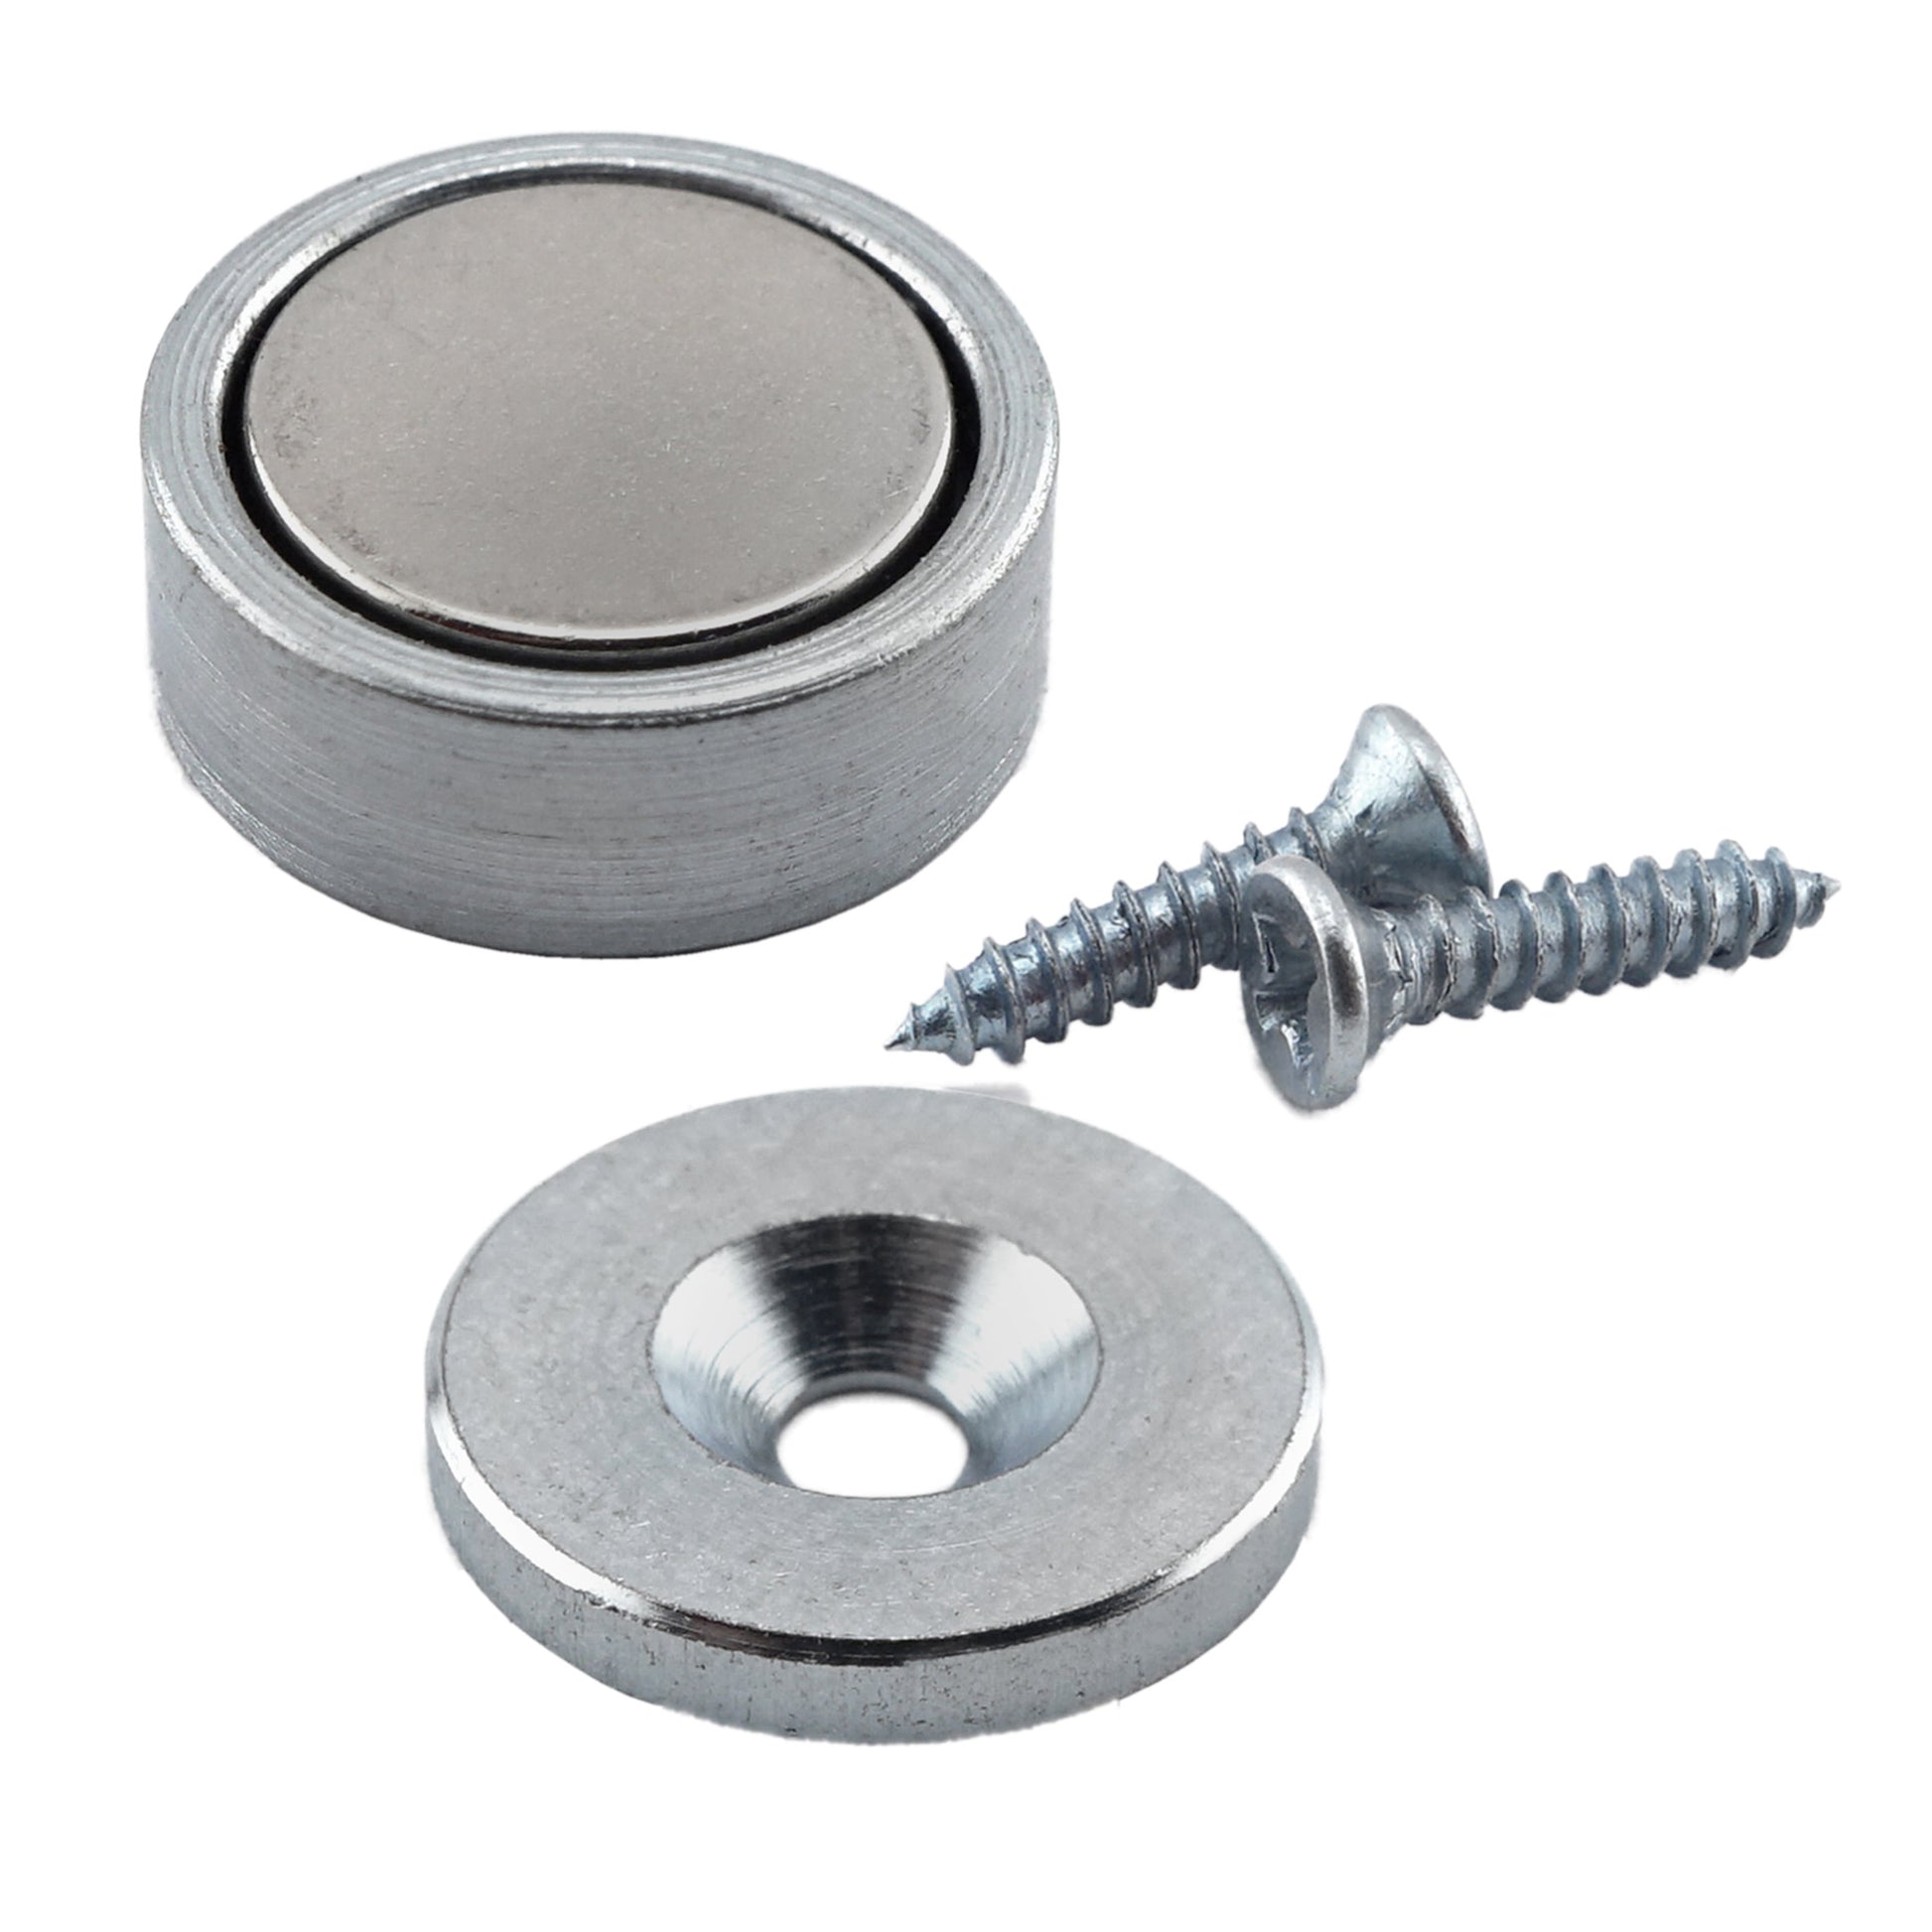 Load image into Gallery viewer, 07572 Neodymium Latch Magnet Kit (2 sets) - 45 Degree Angle View